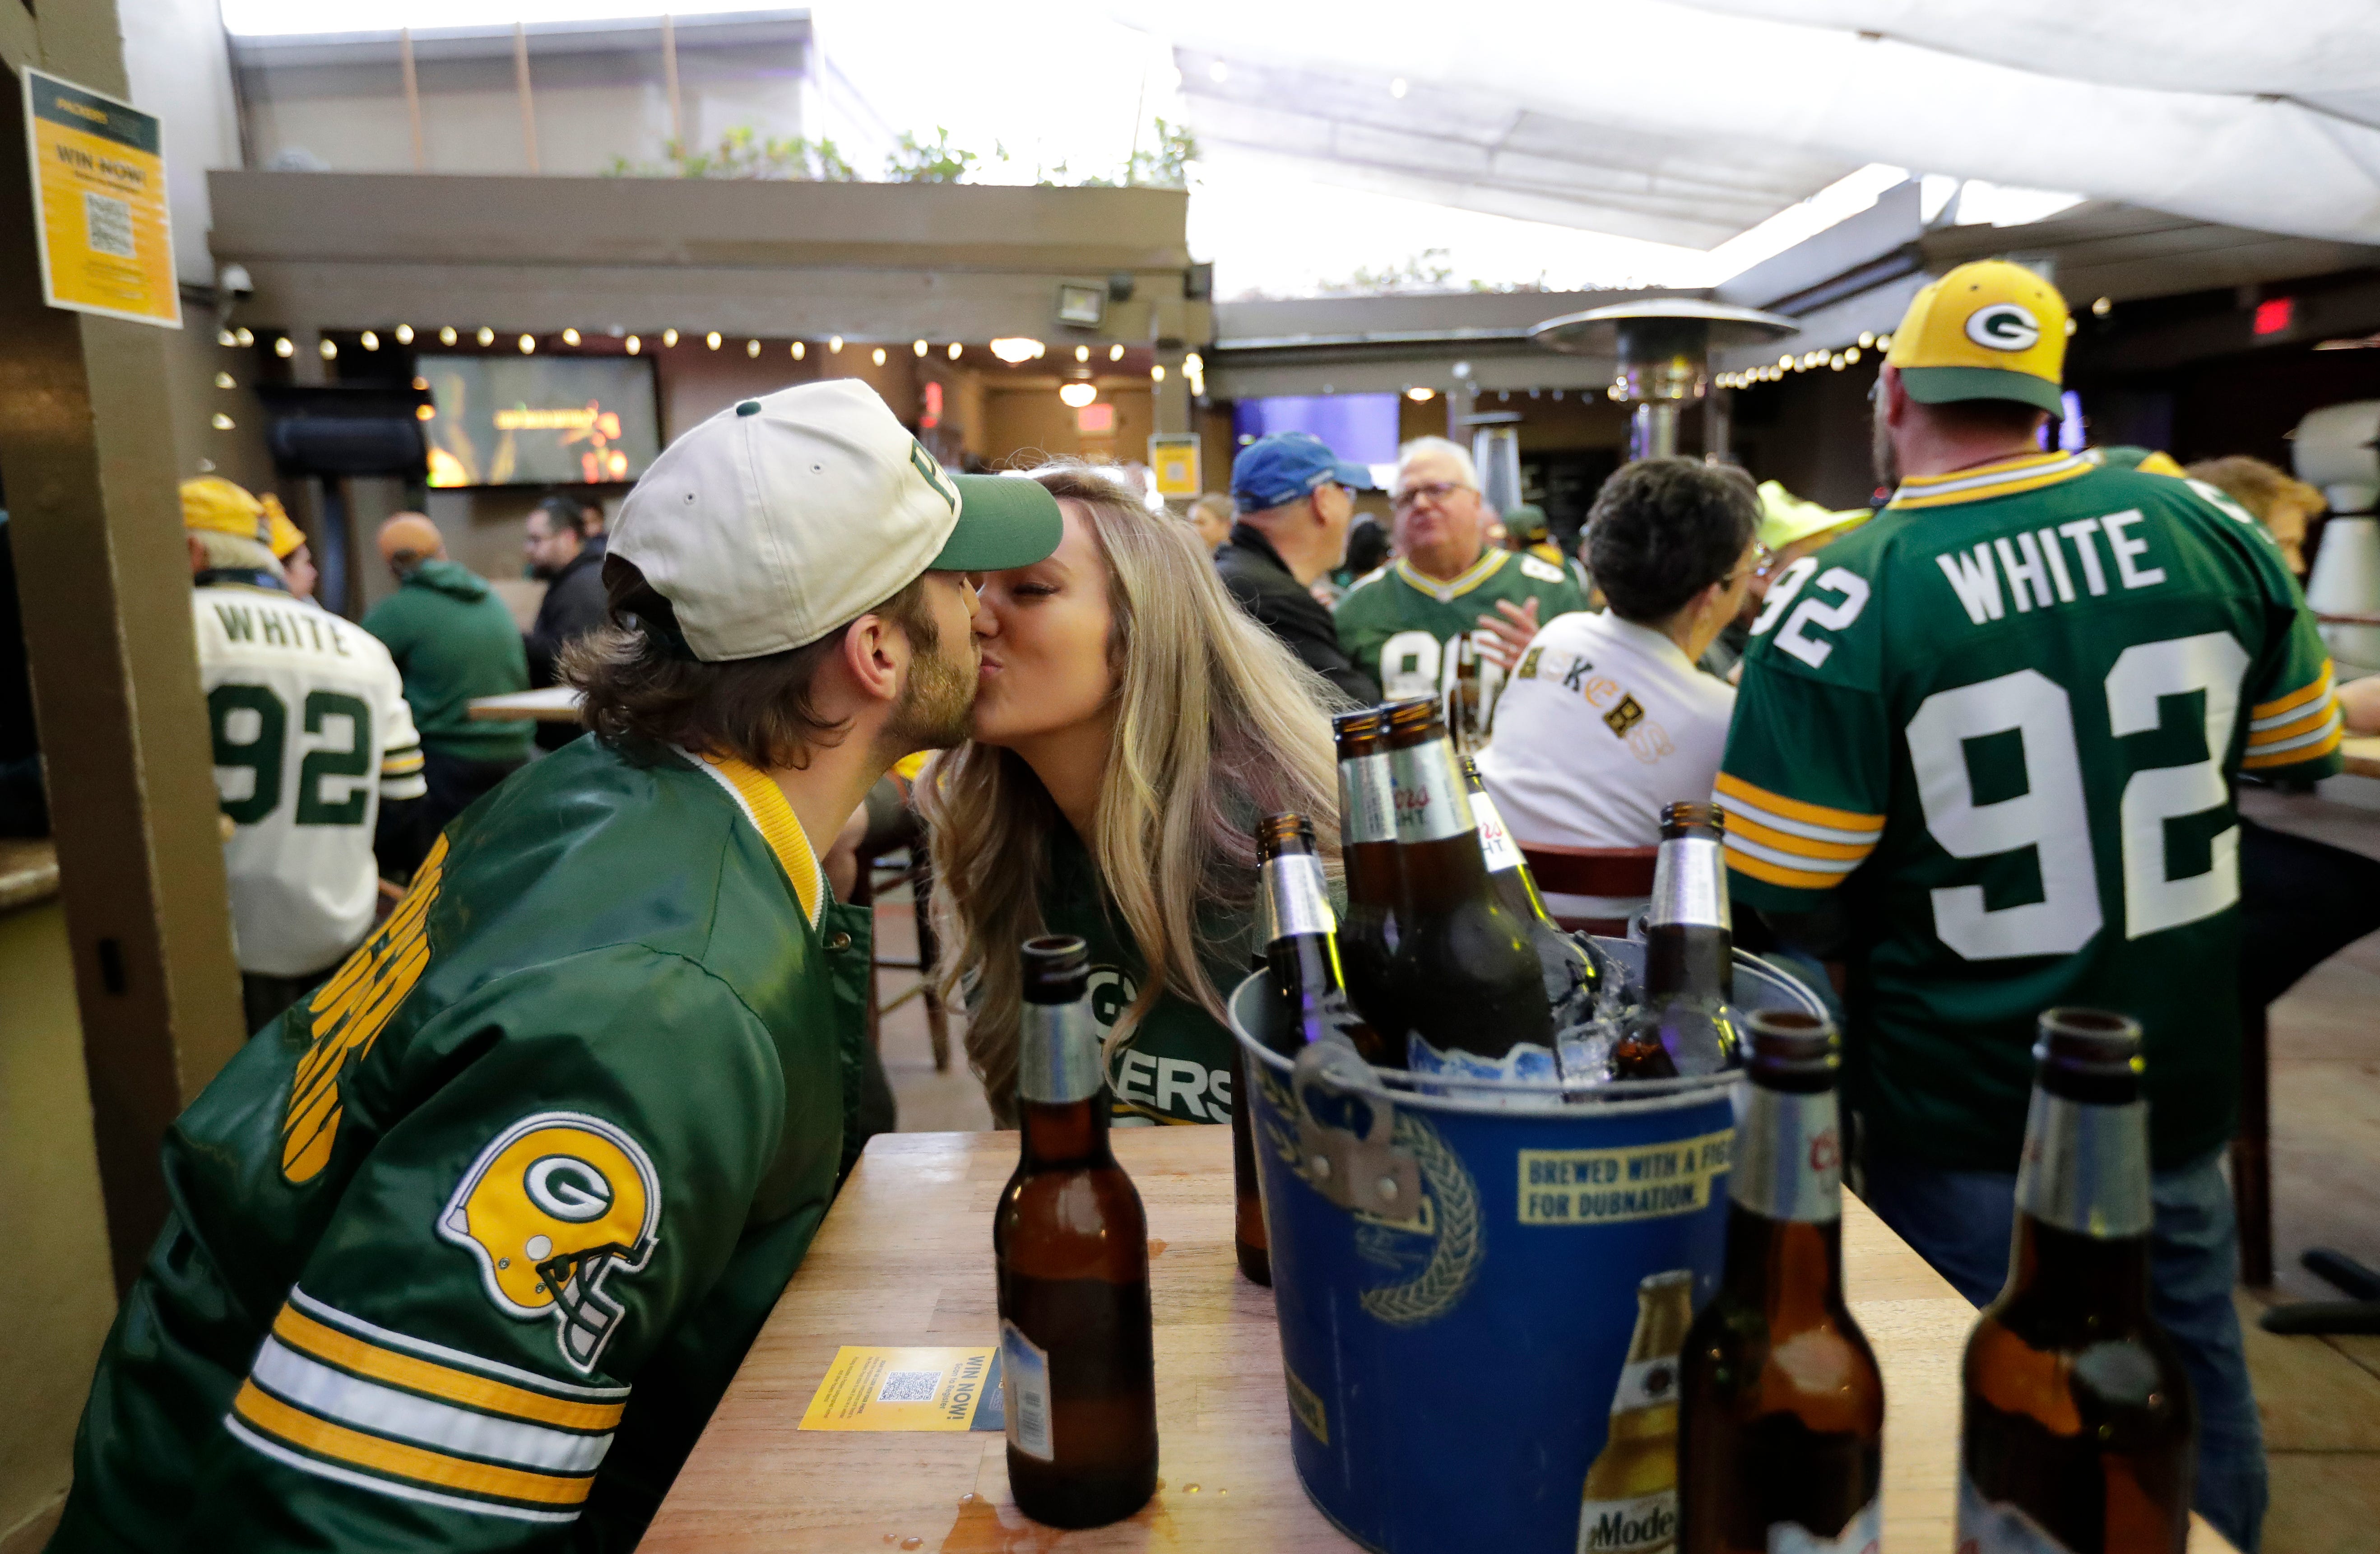 Green Bay Packers fans Tyler Hartzheim of Playa del Rey, California and his girlfriend Kimi McFarland of Hunington Beach, California sneak a kiss during the Packers Everywhere pep rally Friday, January 19, 2024, at The Patio in Palo Alto, California.